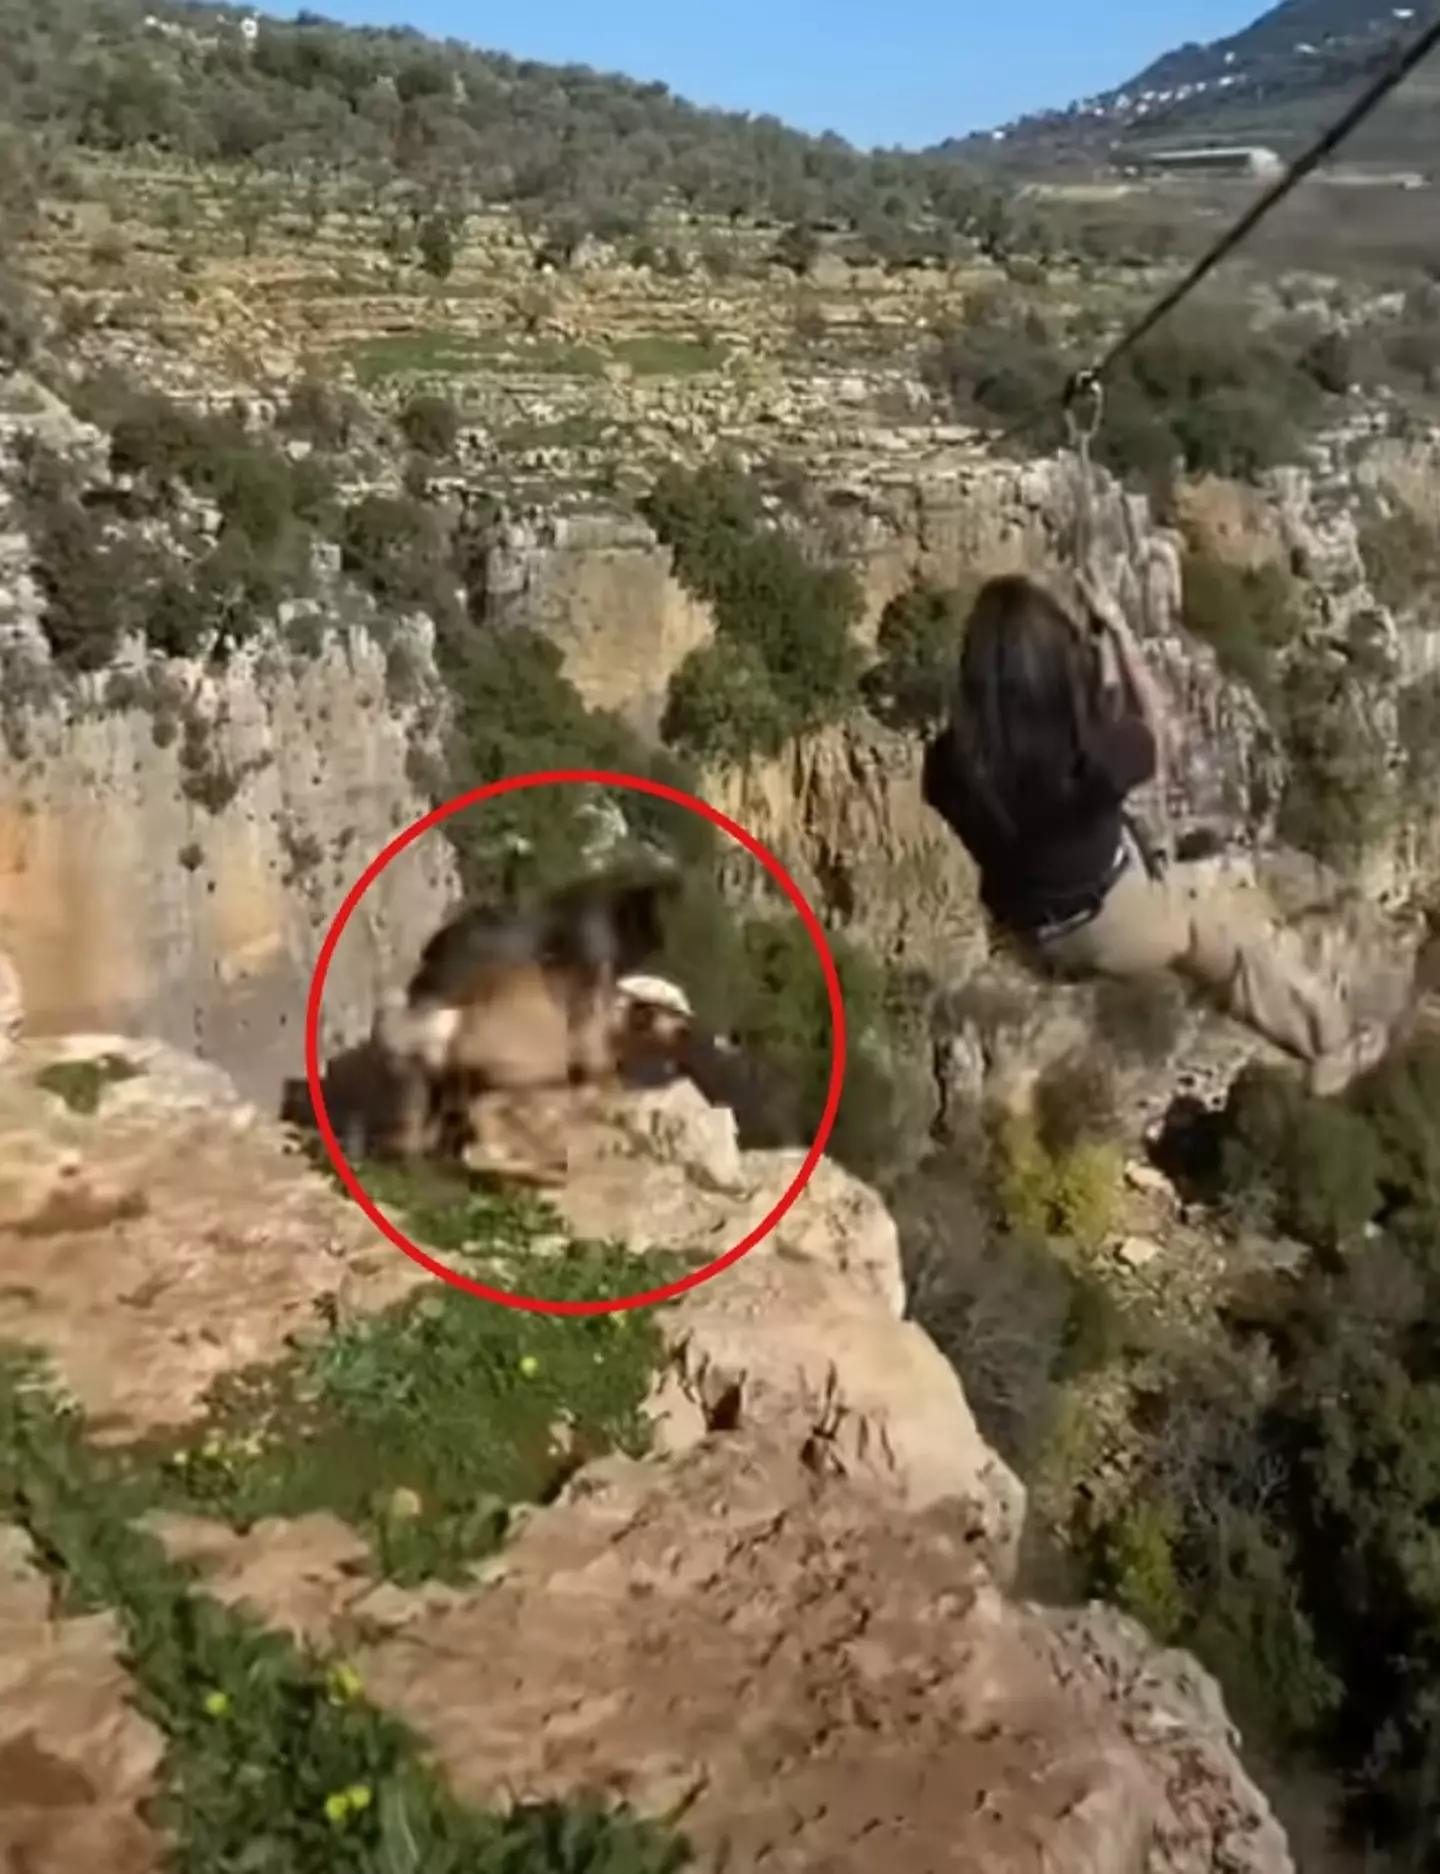 People feared the dog was going to jump off the cliff to follow the woman.